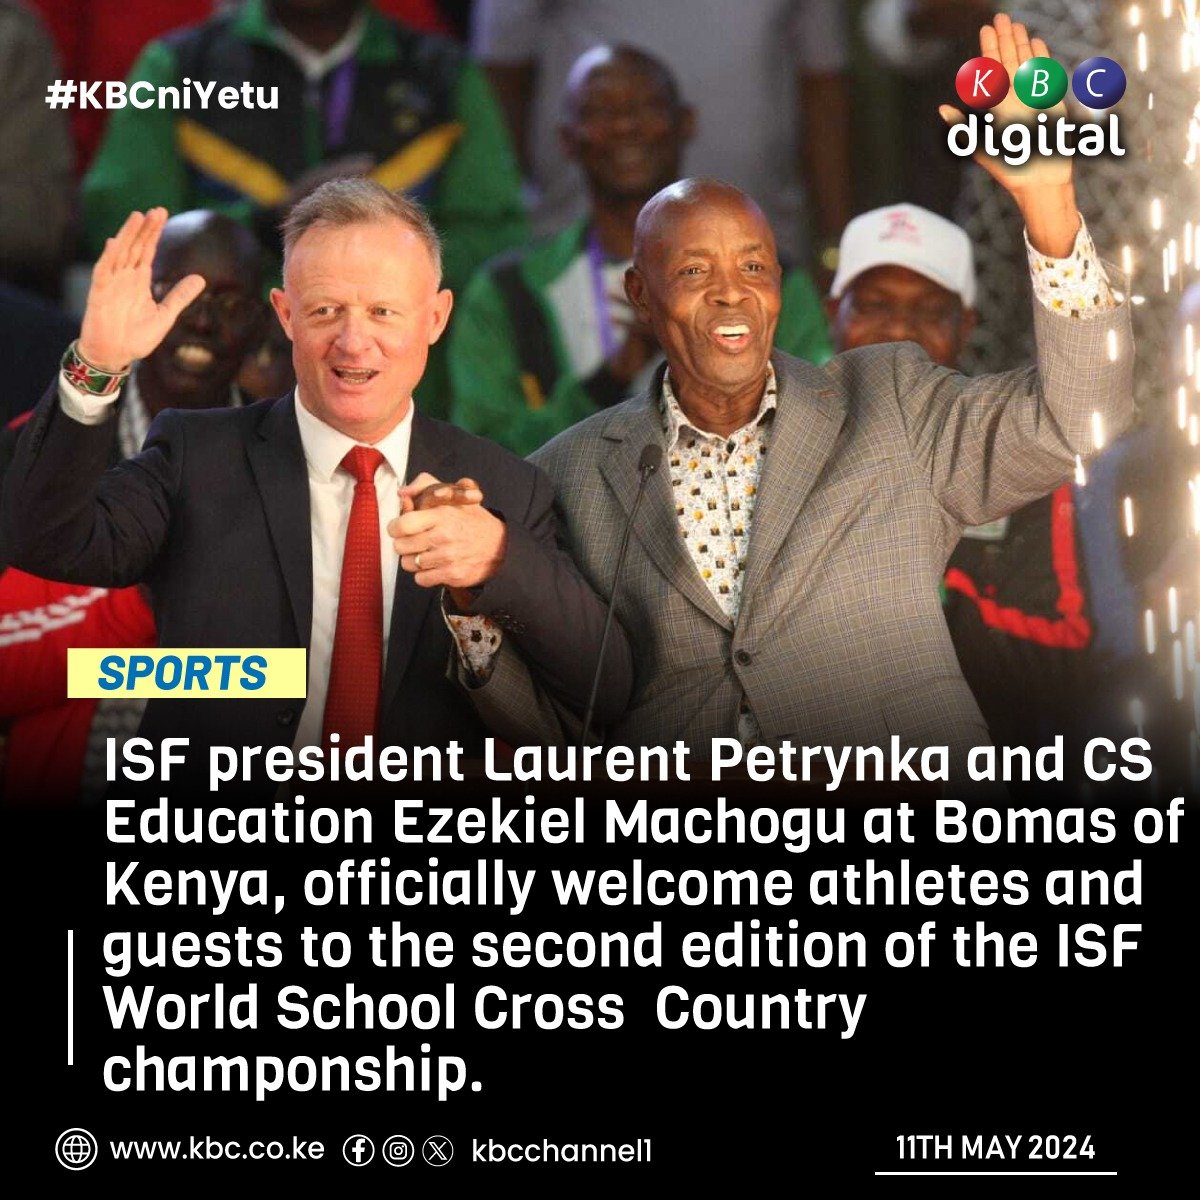 ISF president Laurent Petrynka and CS Education Ezekiel Machogu at Bomas of Kenya, officially welcome athletes and guests to the second edition of the ISF World School Cross  Country champonship
#KBCniYetu ^RO